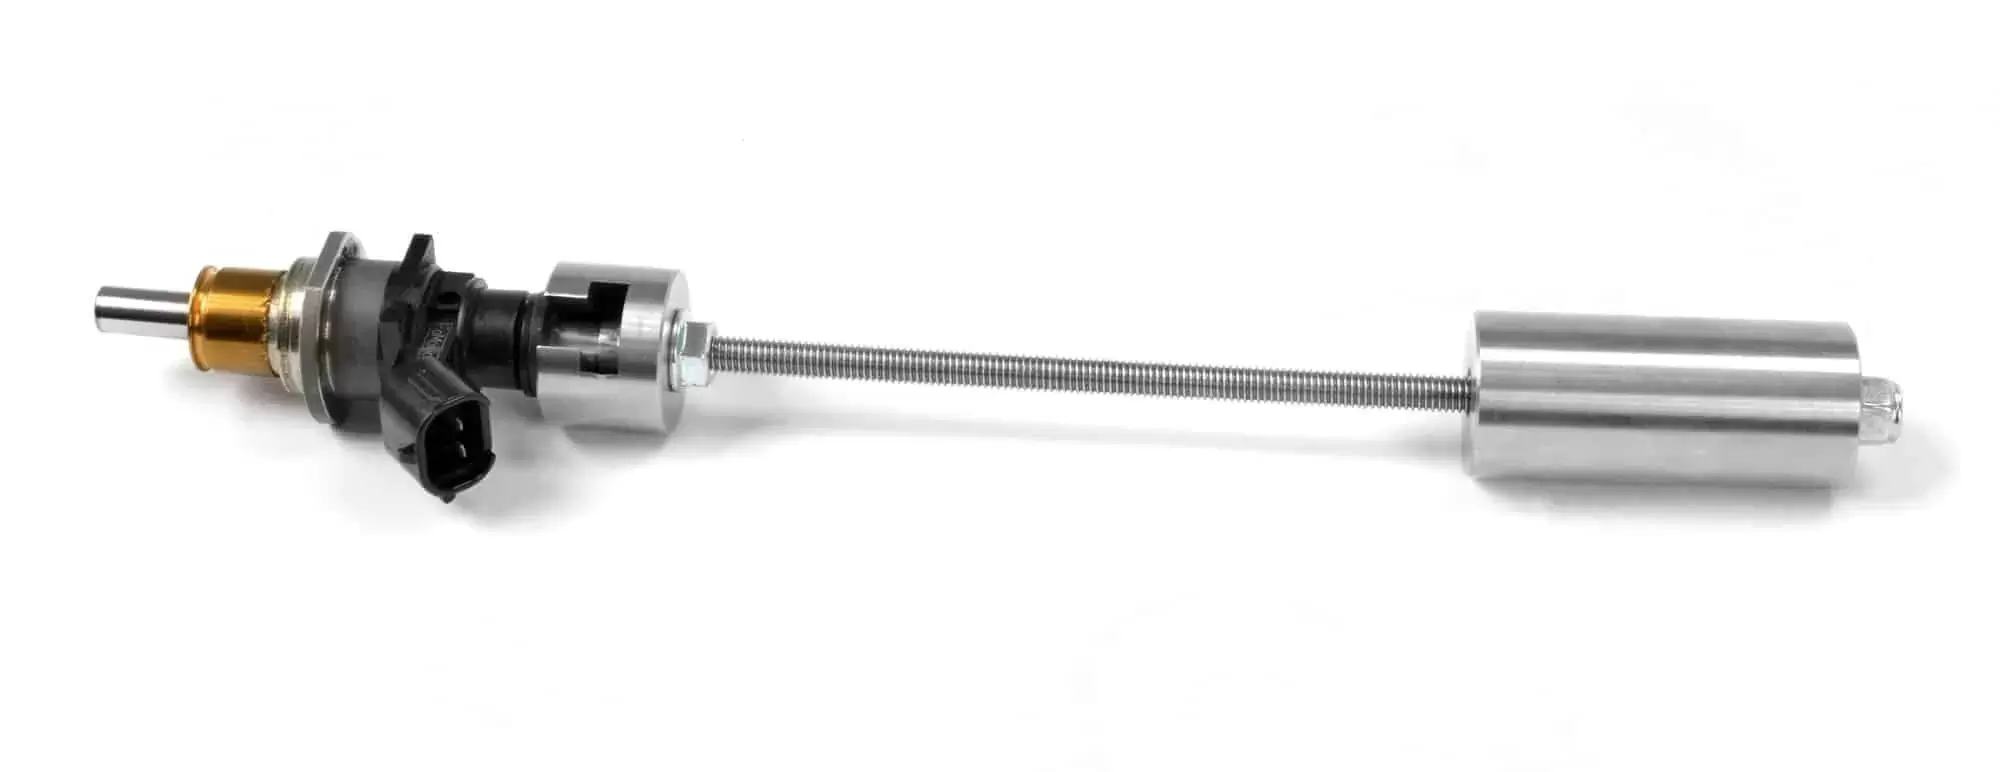 By utilizing a slide hammer design, the Mazdaspeed injectors can be easily removed.